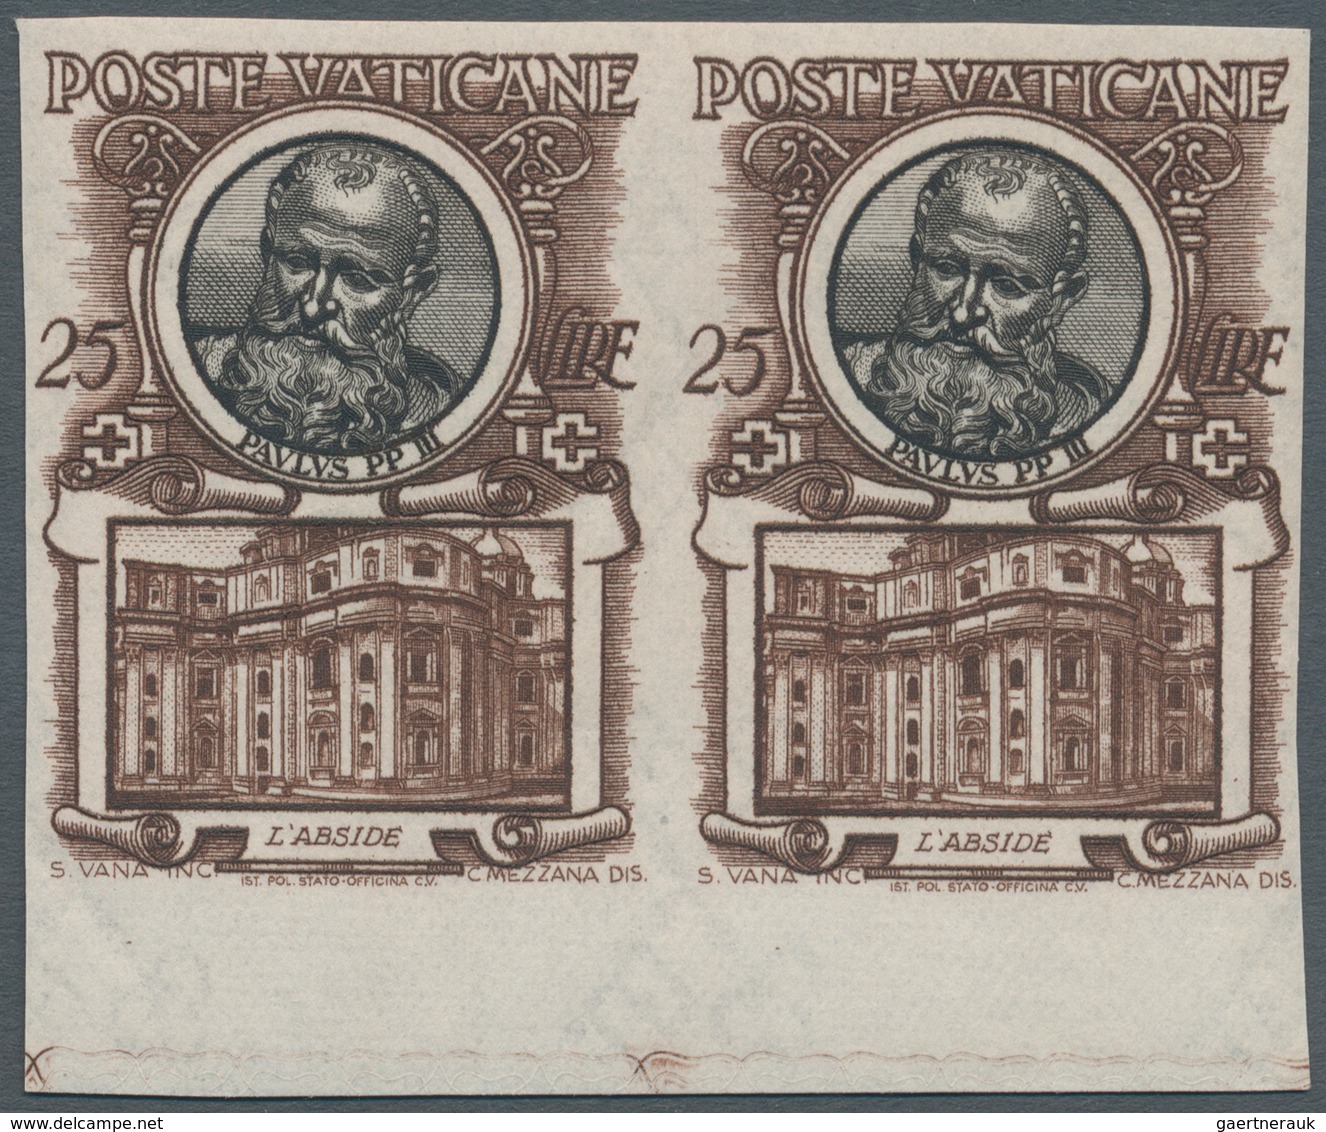 Vatikan: 1953, 25 L Brown/black Definitive "popes", IMPERFORATED Horizontal Pair From Lower Margin. - Ungebraucht